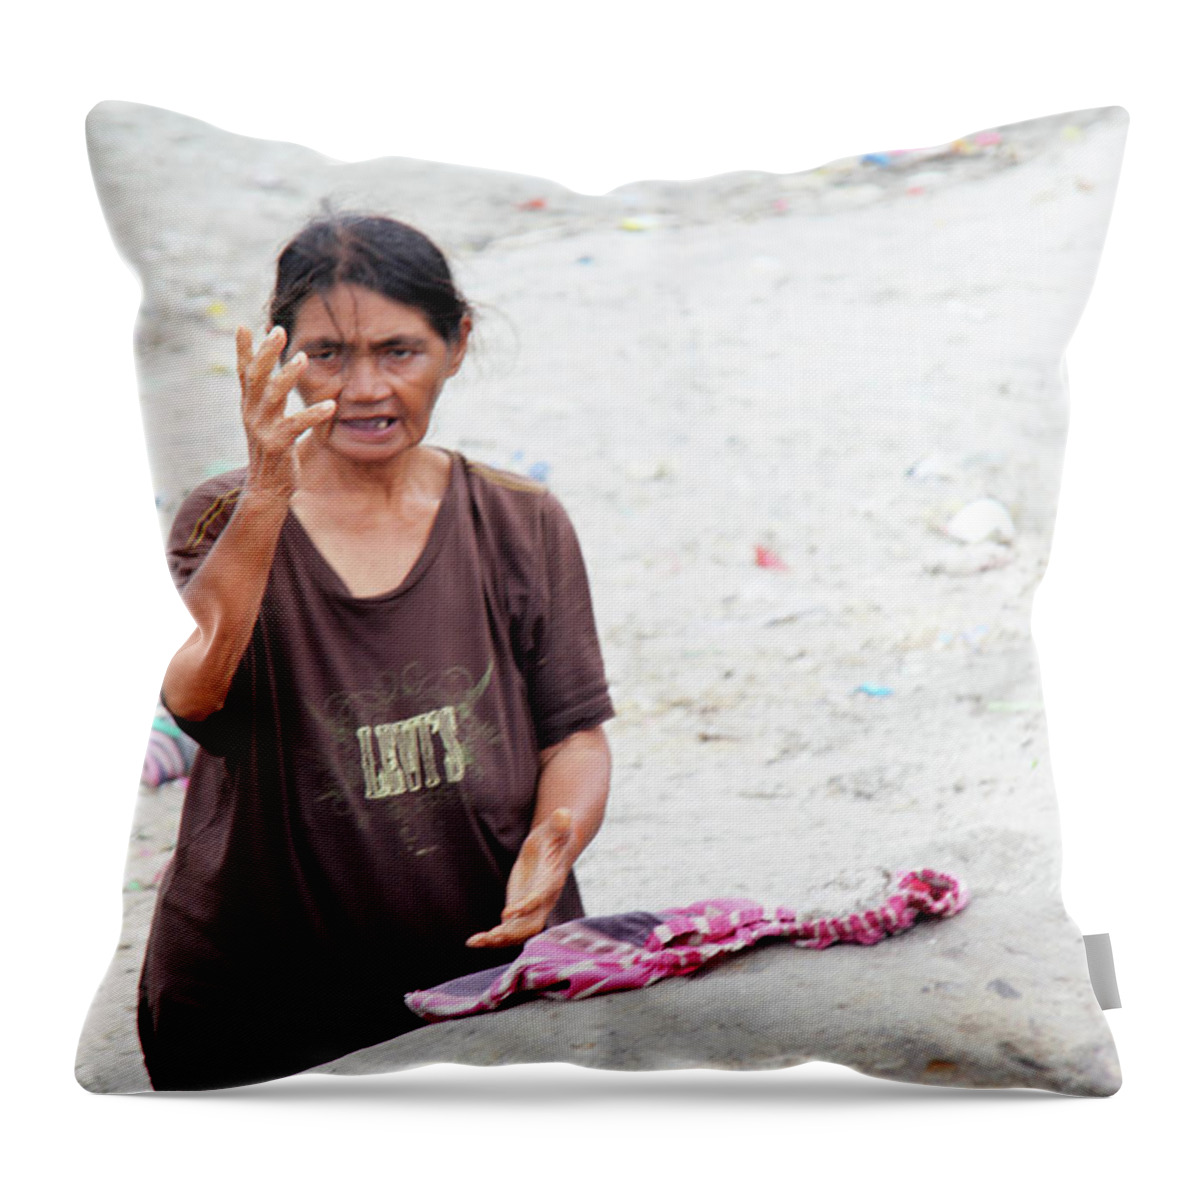 Asia Throw Pillow featuring the photograph These Hands Have Toiled More Than You Could Imagine by Jez C Self